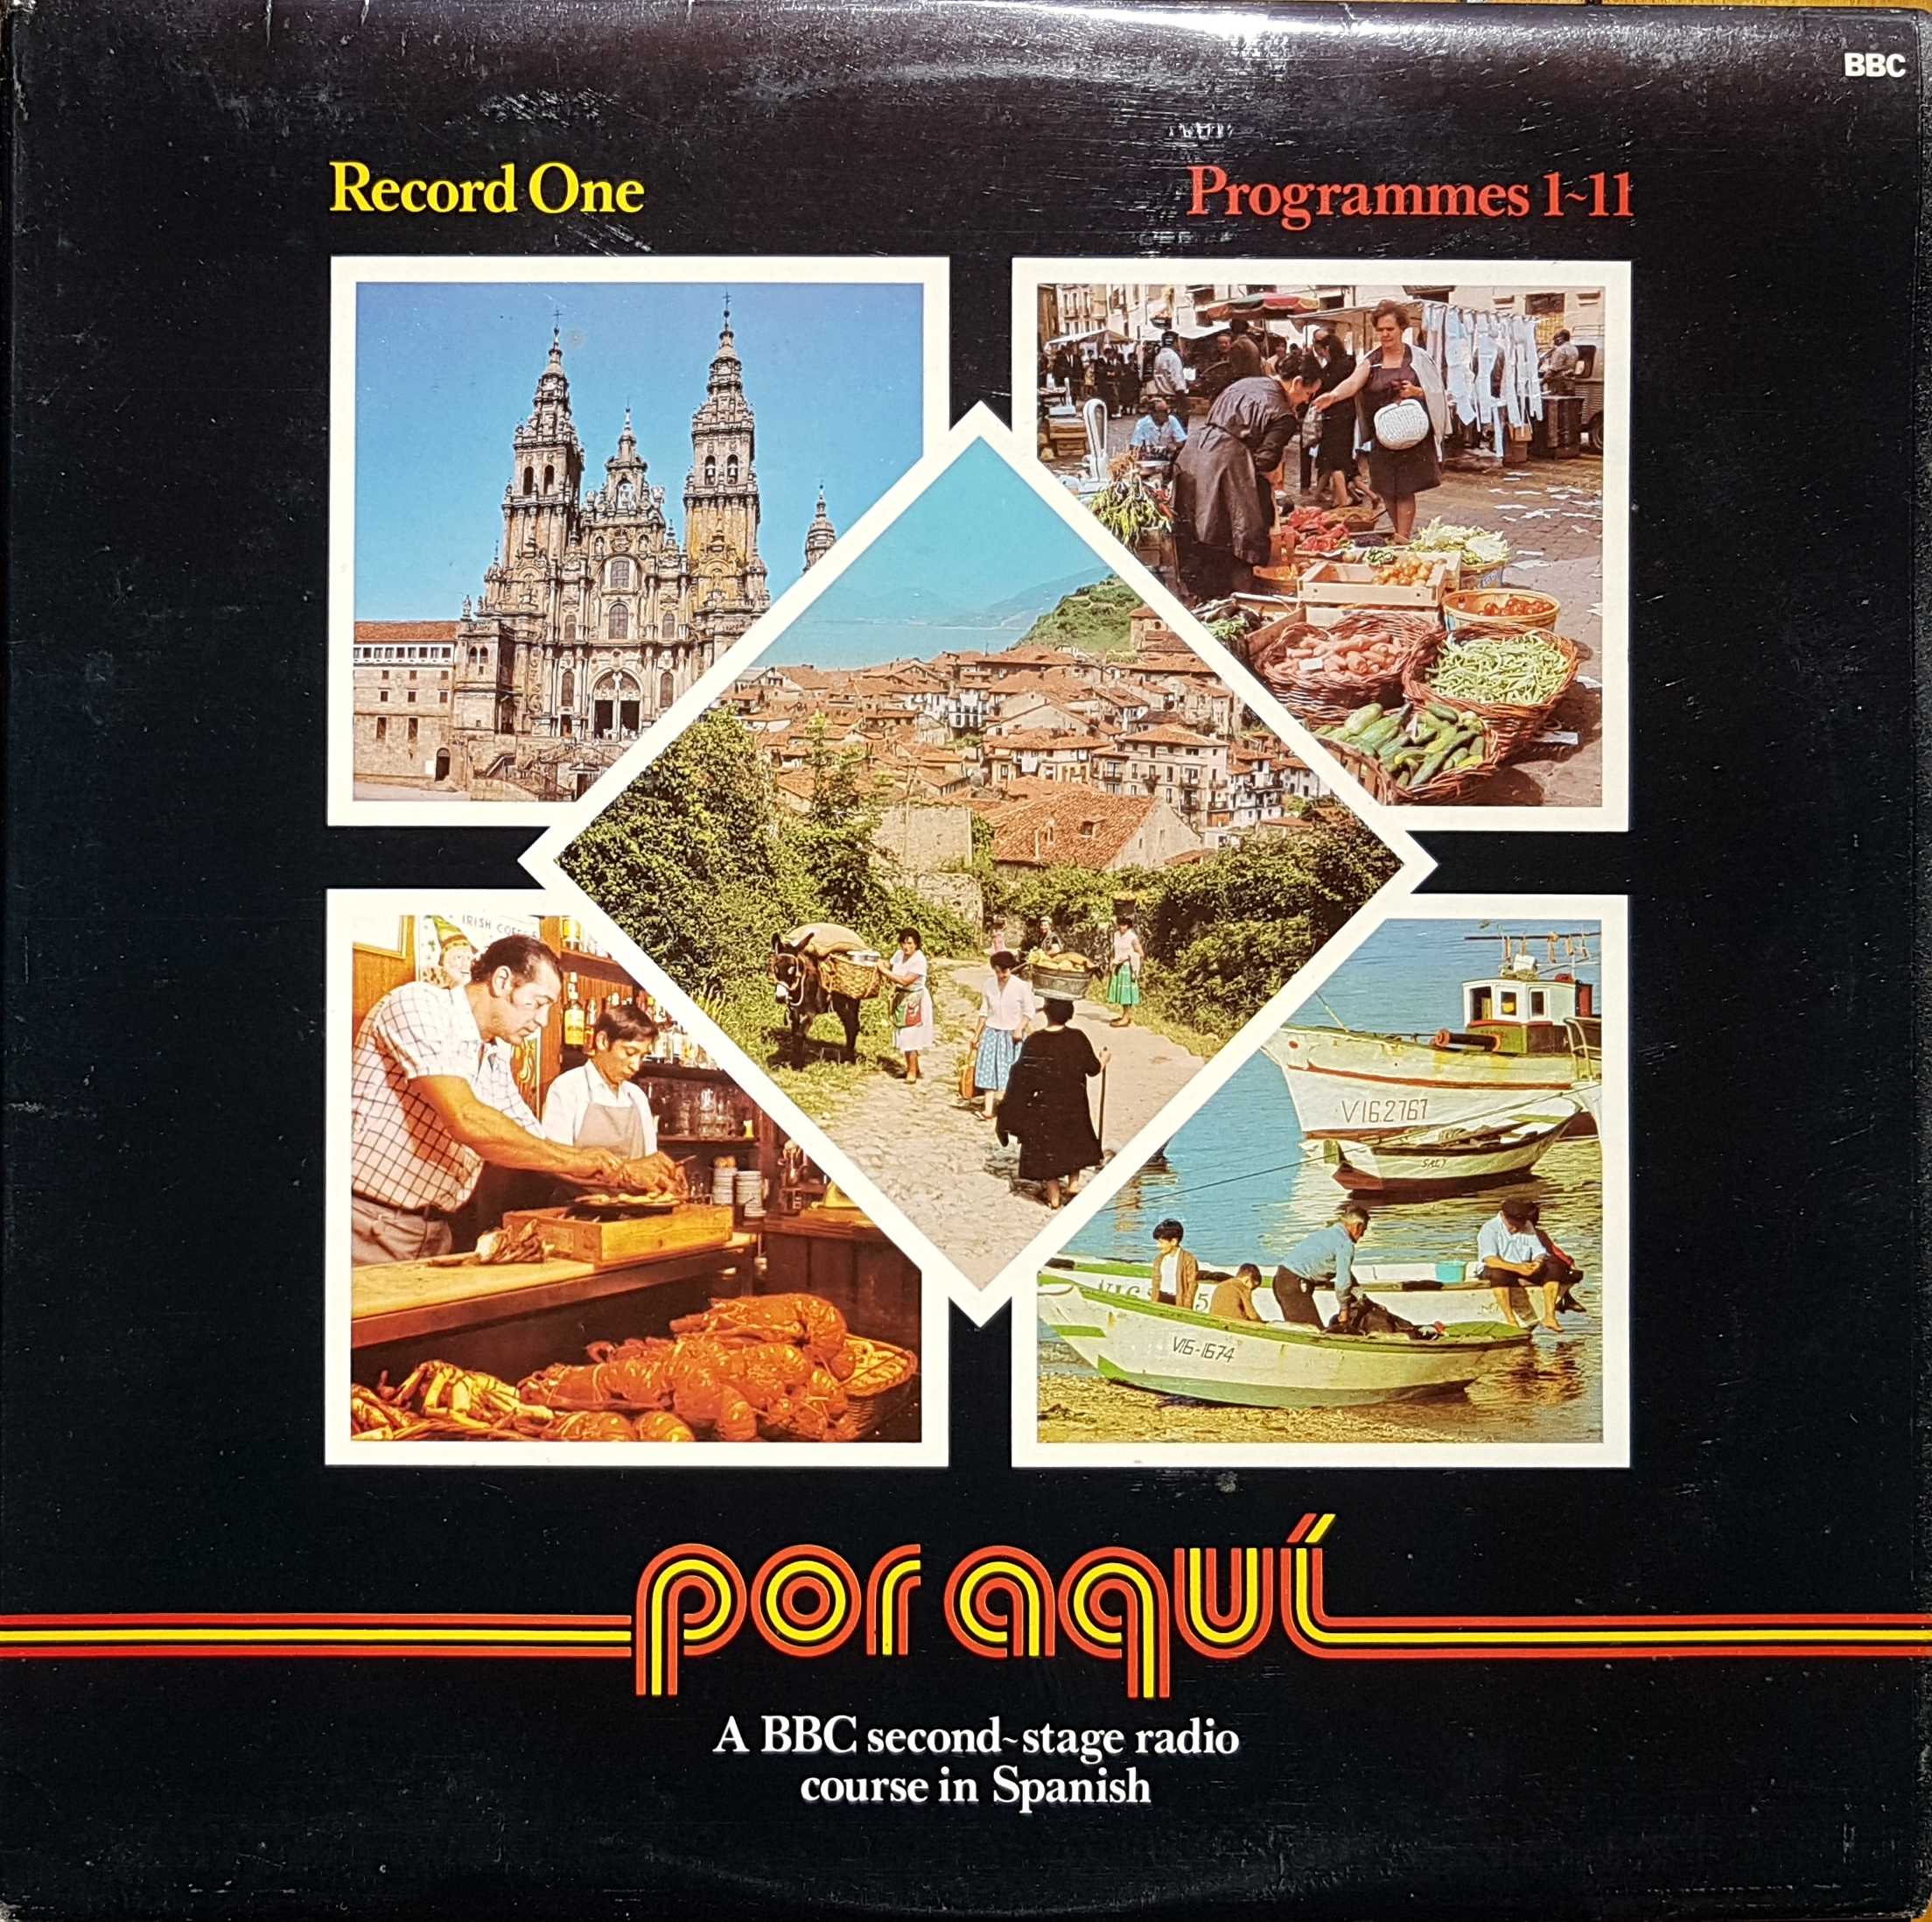 Picture of OP 238 Por aqui - A BBC second-stage radio course in Spanish - Record 1 - Programmes 1 - 11 by artist Various from the BBC albums - Records and Tapes library